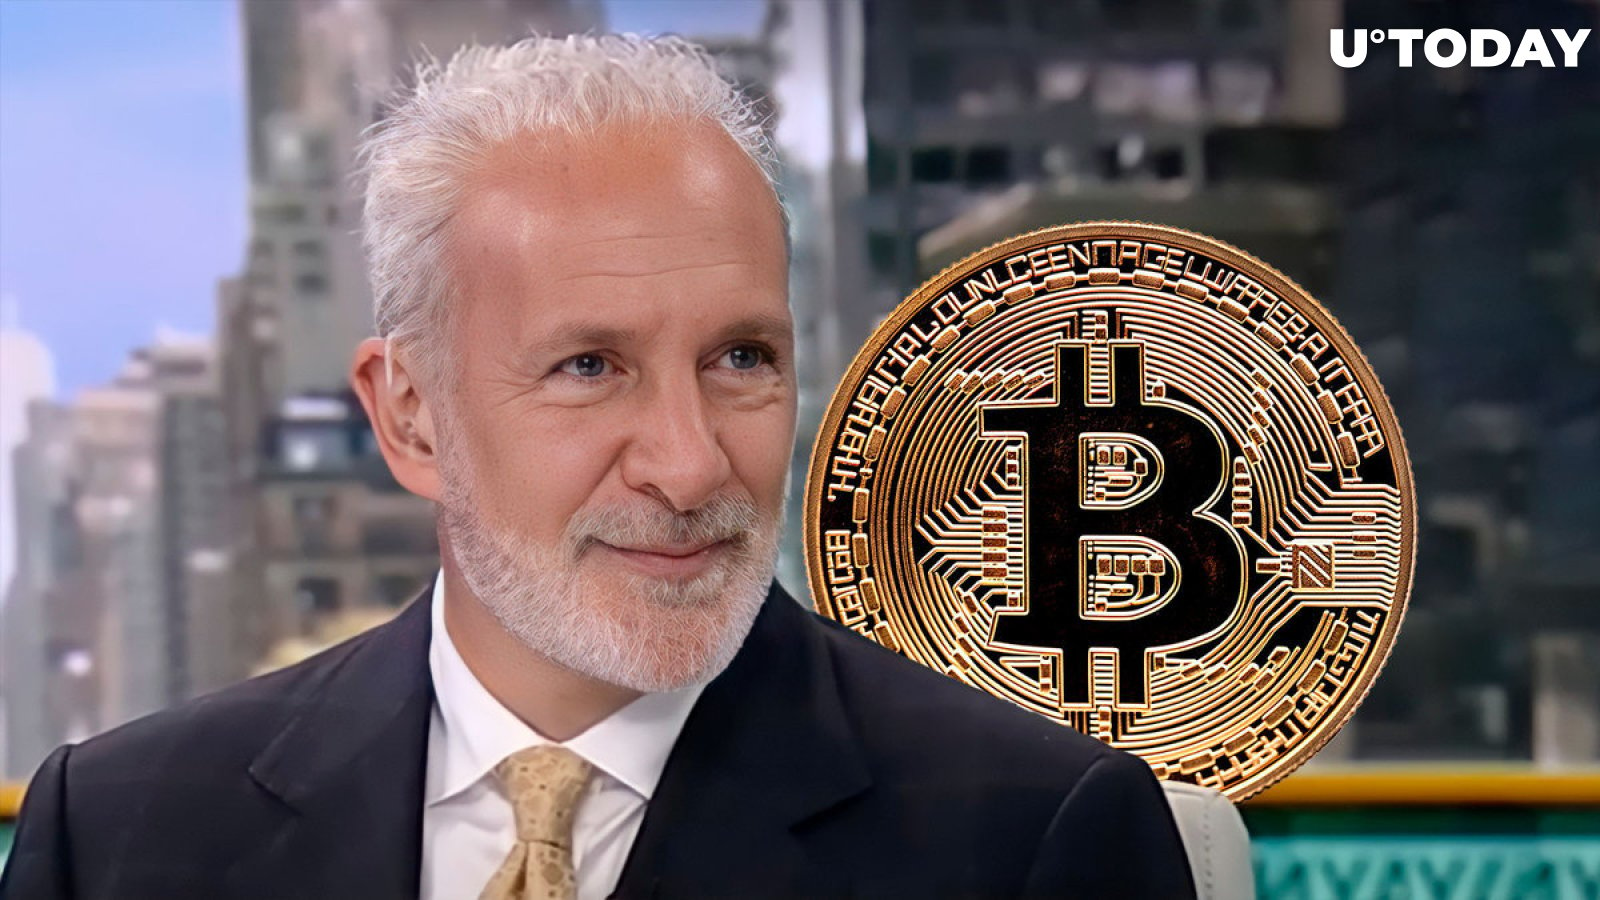 Peter Schiff Accused of Promoting Bitcoin